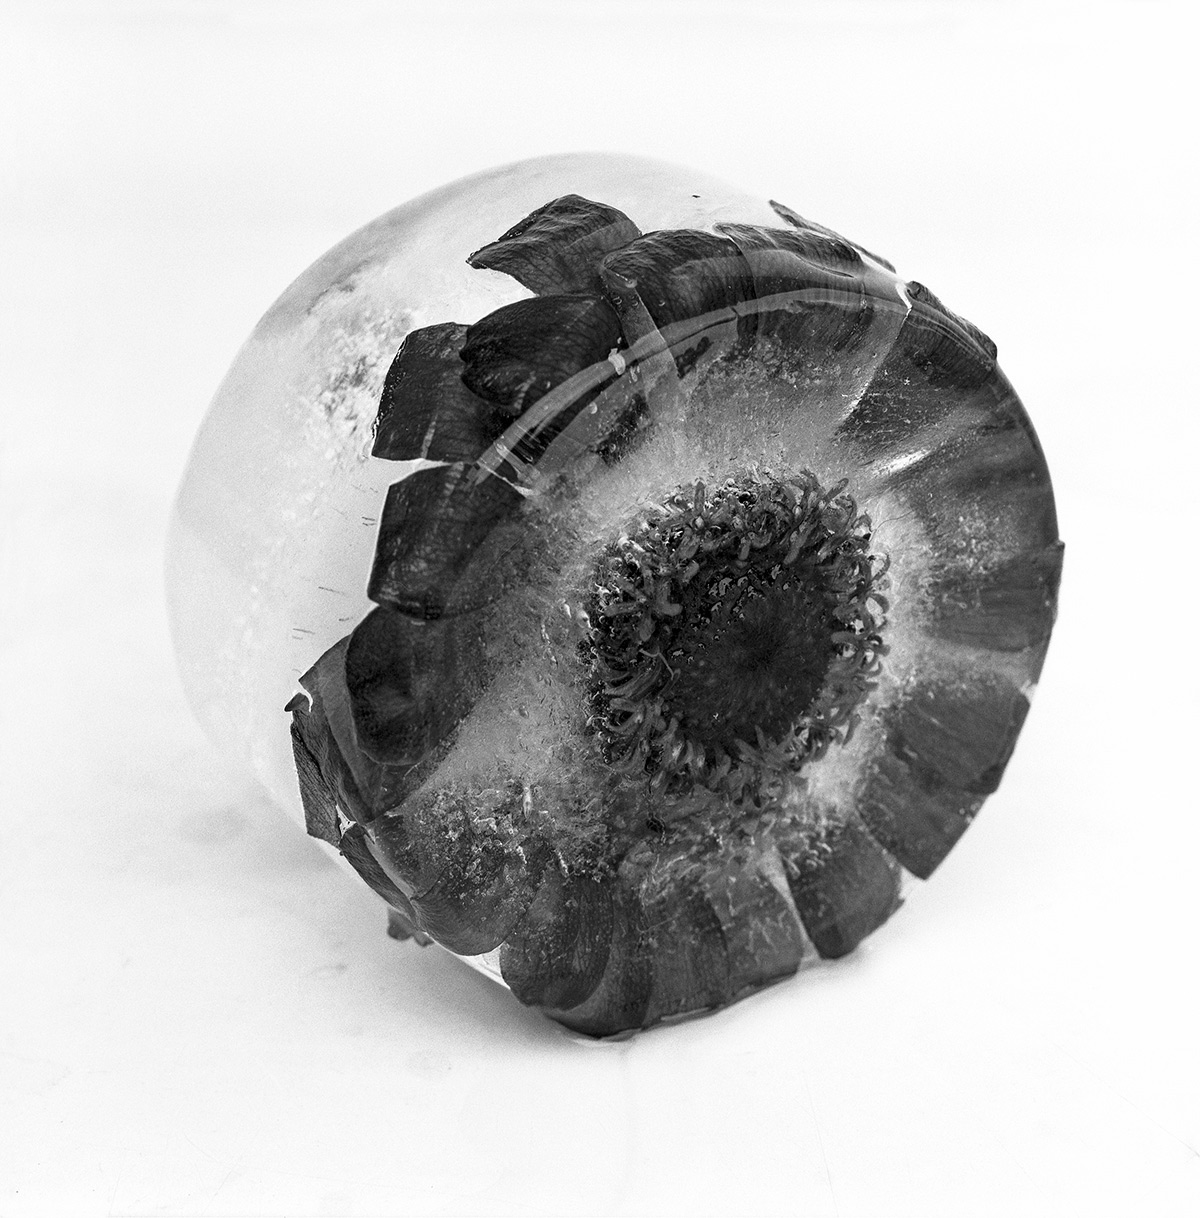 photo art video ice frozen melting objects Flowers blackandwhite b&w art photography film photography analogue photography Hasselblad abstract